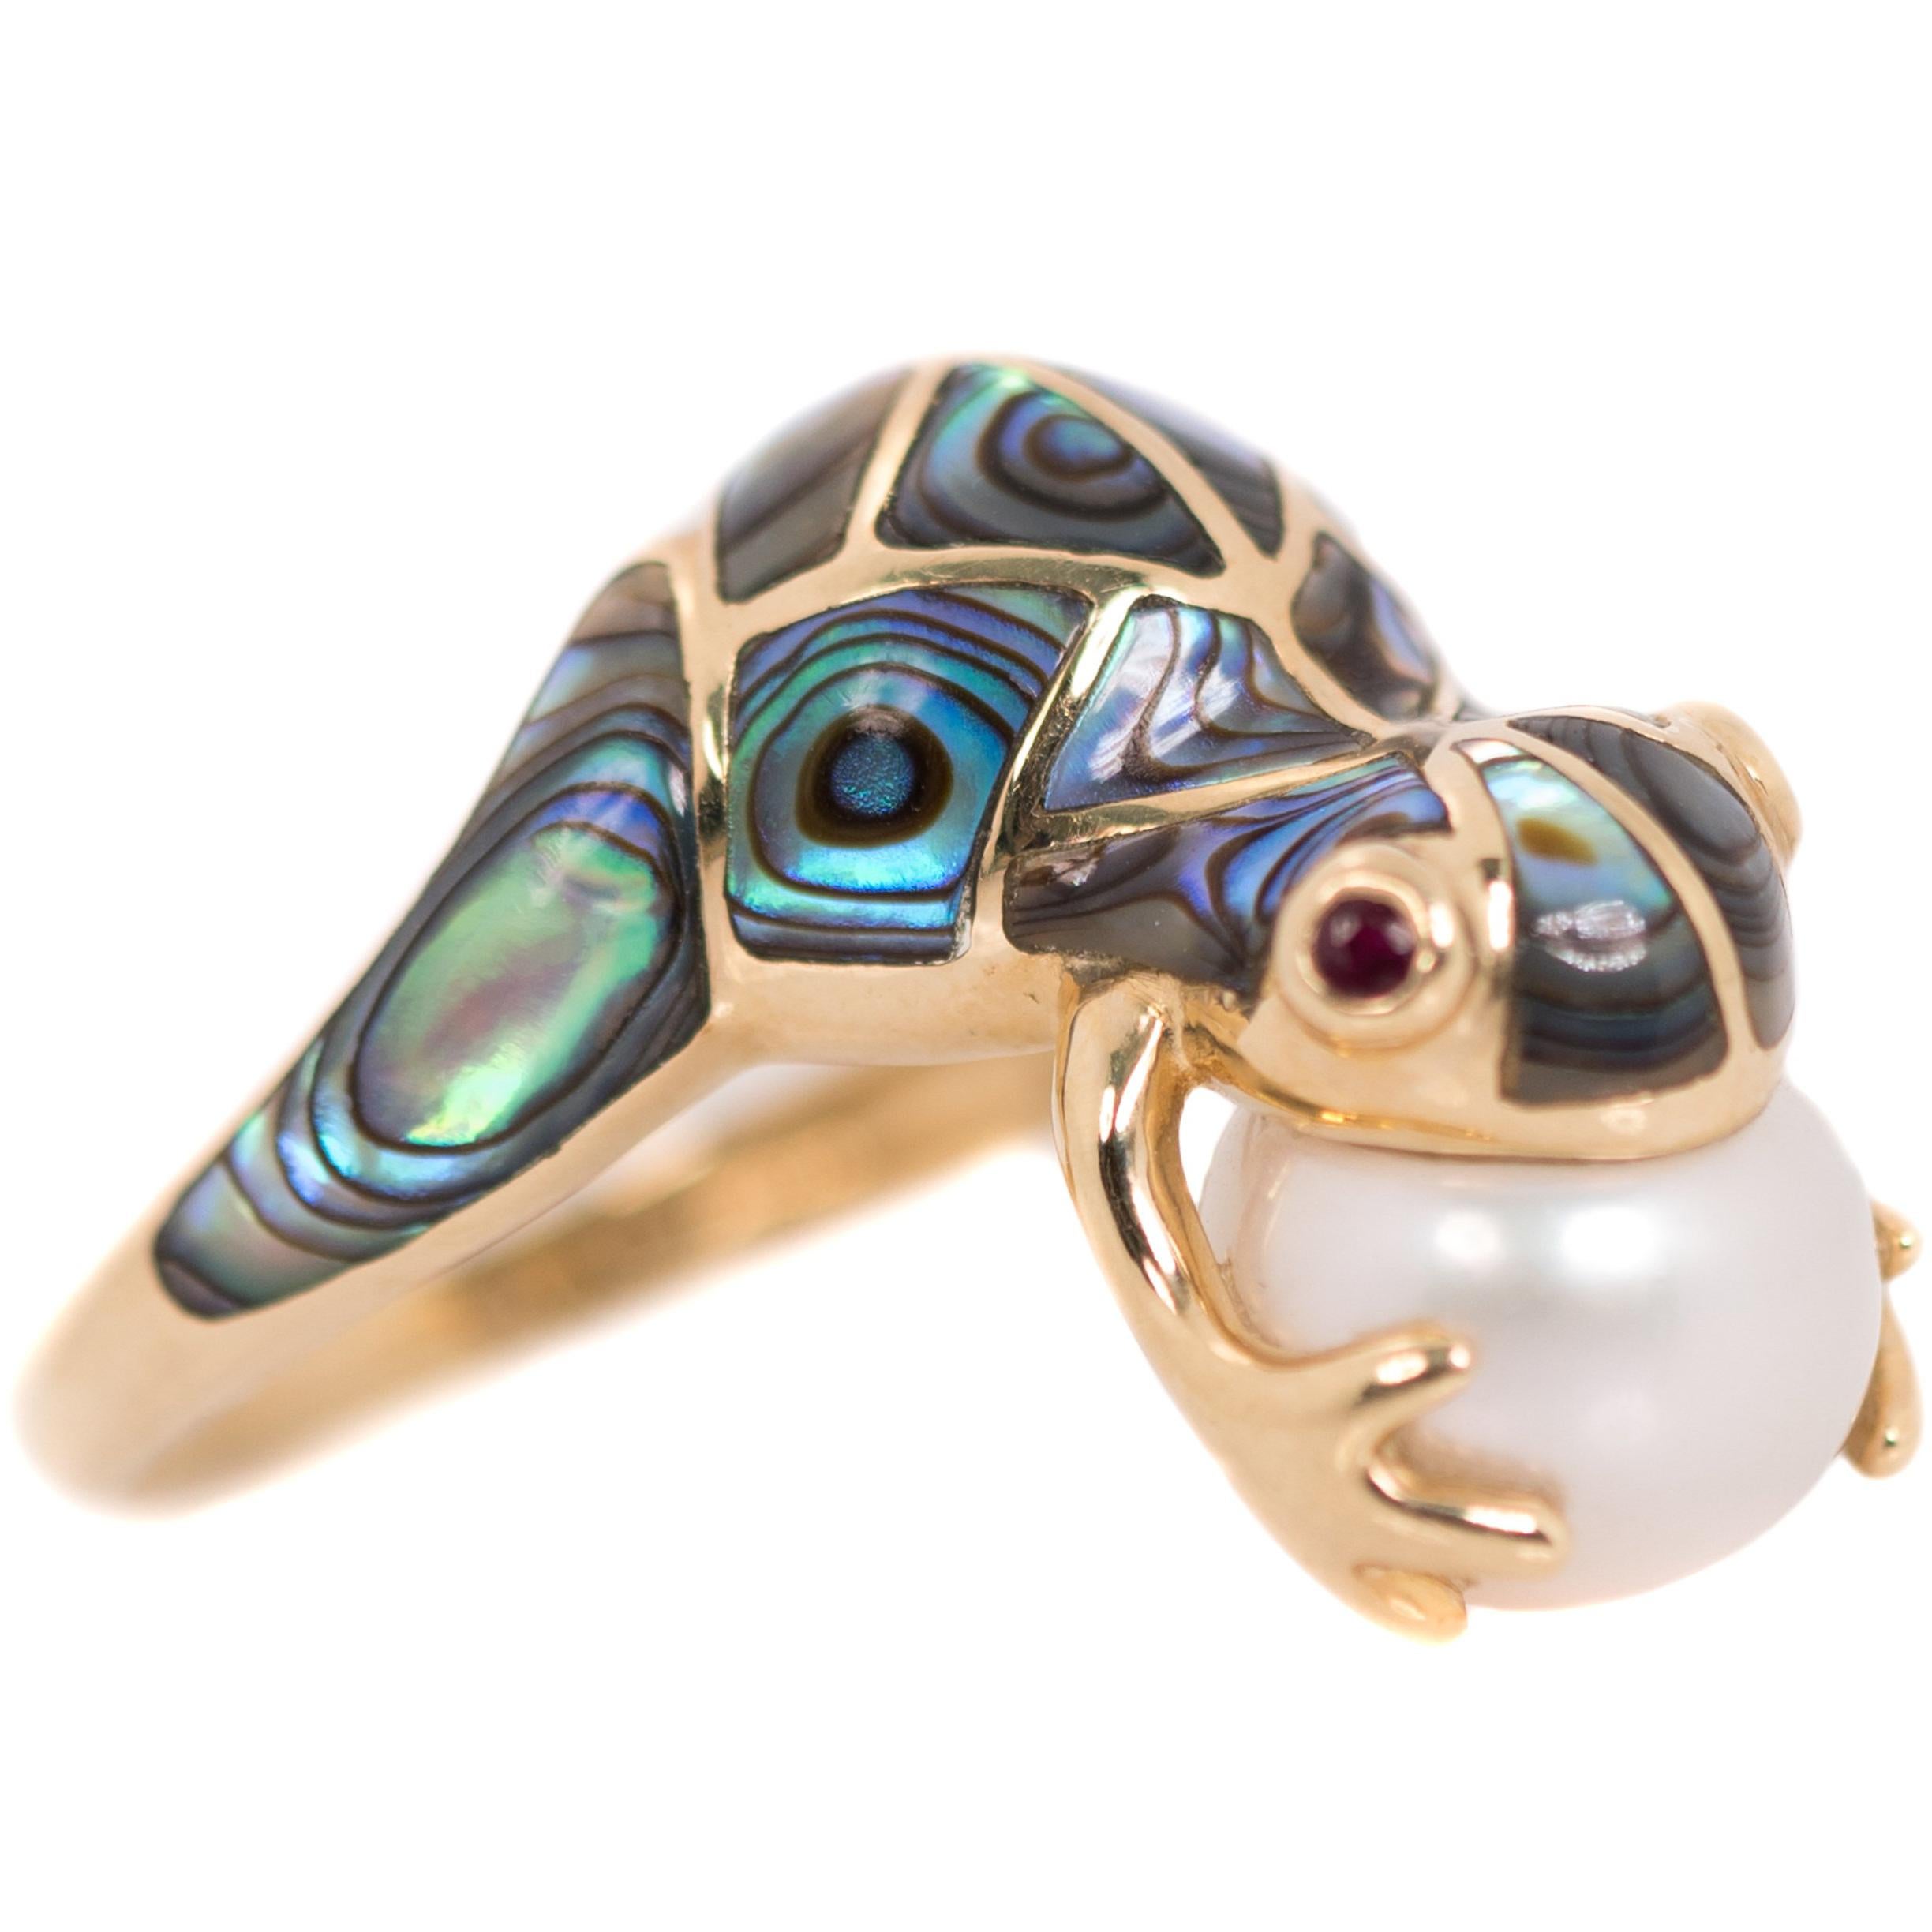 Frog Ring with 14 Karat Yellow Gold, Pearl, Abalone and Ruby